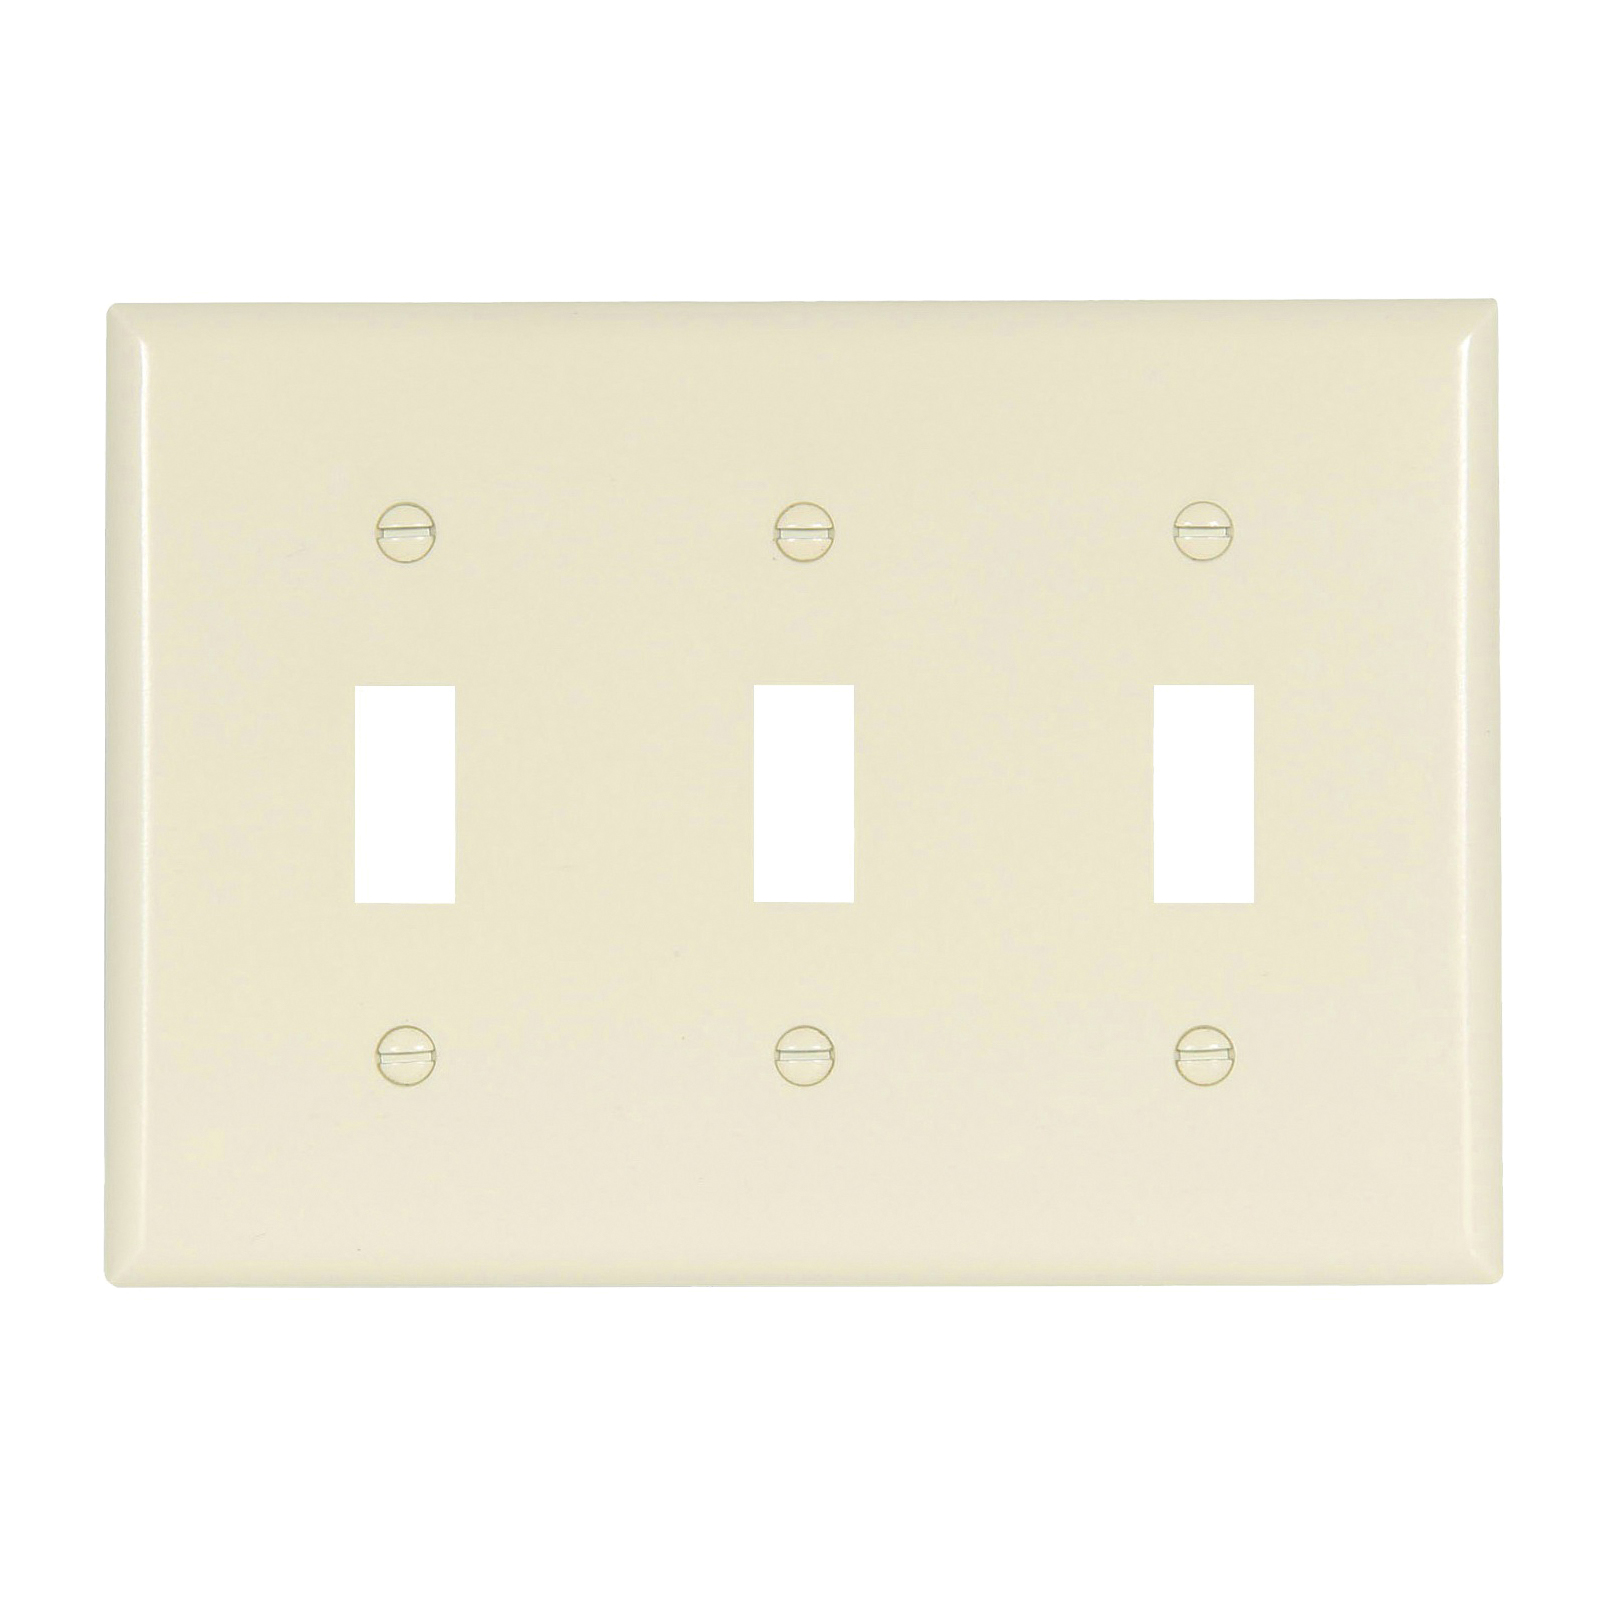 Eaton Wiring Devices 2141LA-BOX Wallplate, 4-1/2 in L, 3-3/8 in W, 3 -Gang, Thermoset, Light Almond, High-Gloss